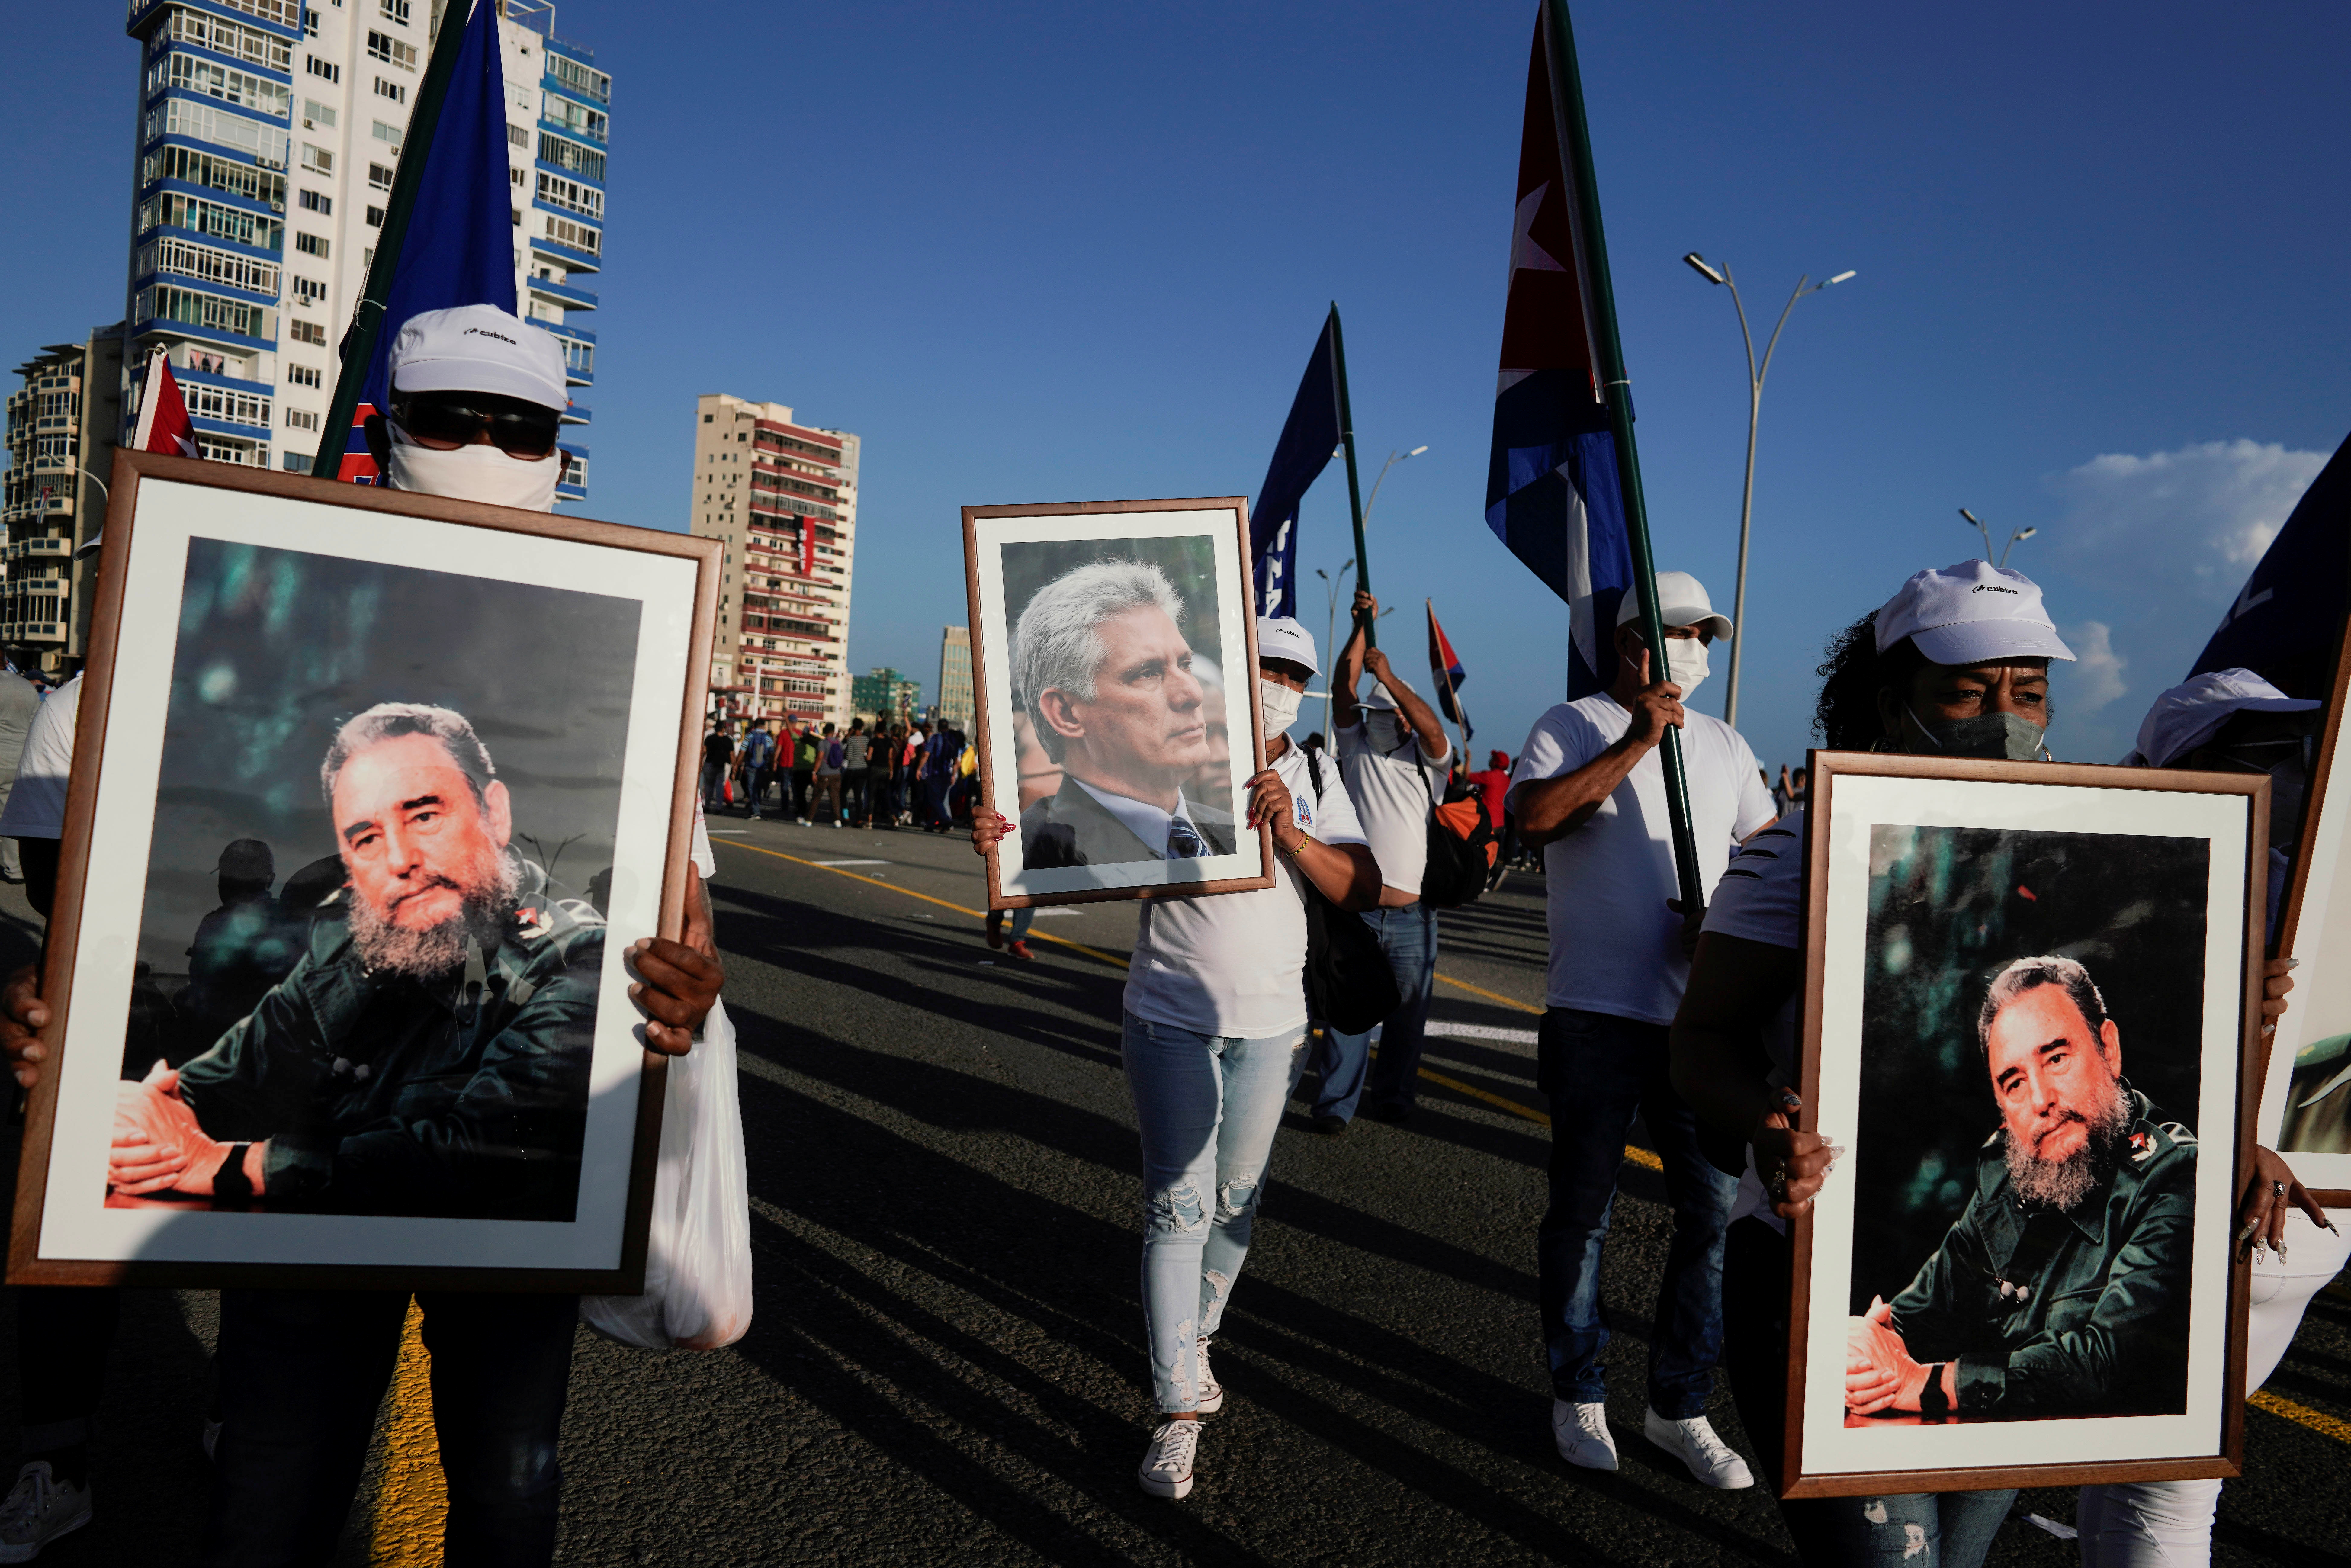 People carry images of late Cuban President Fidel Castro and Cuba's President and First Secretary of the Communist Party Miguel Diaz-Canel during a rally in Havana, Cuba, July 17, 2021. REUTERS/Alexandre Meneghini 